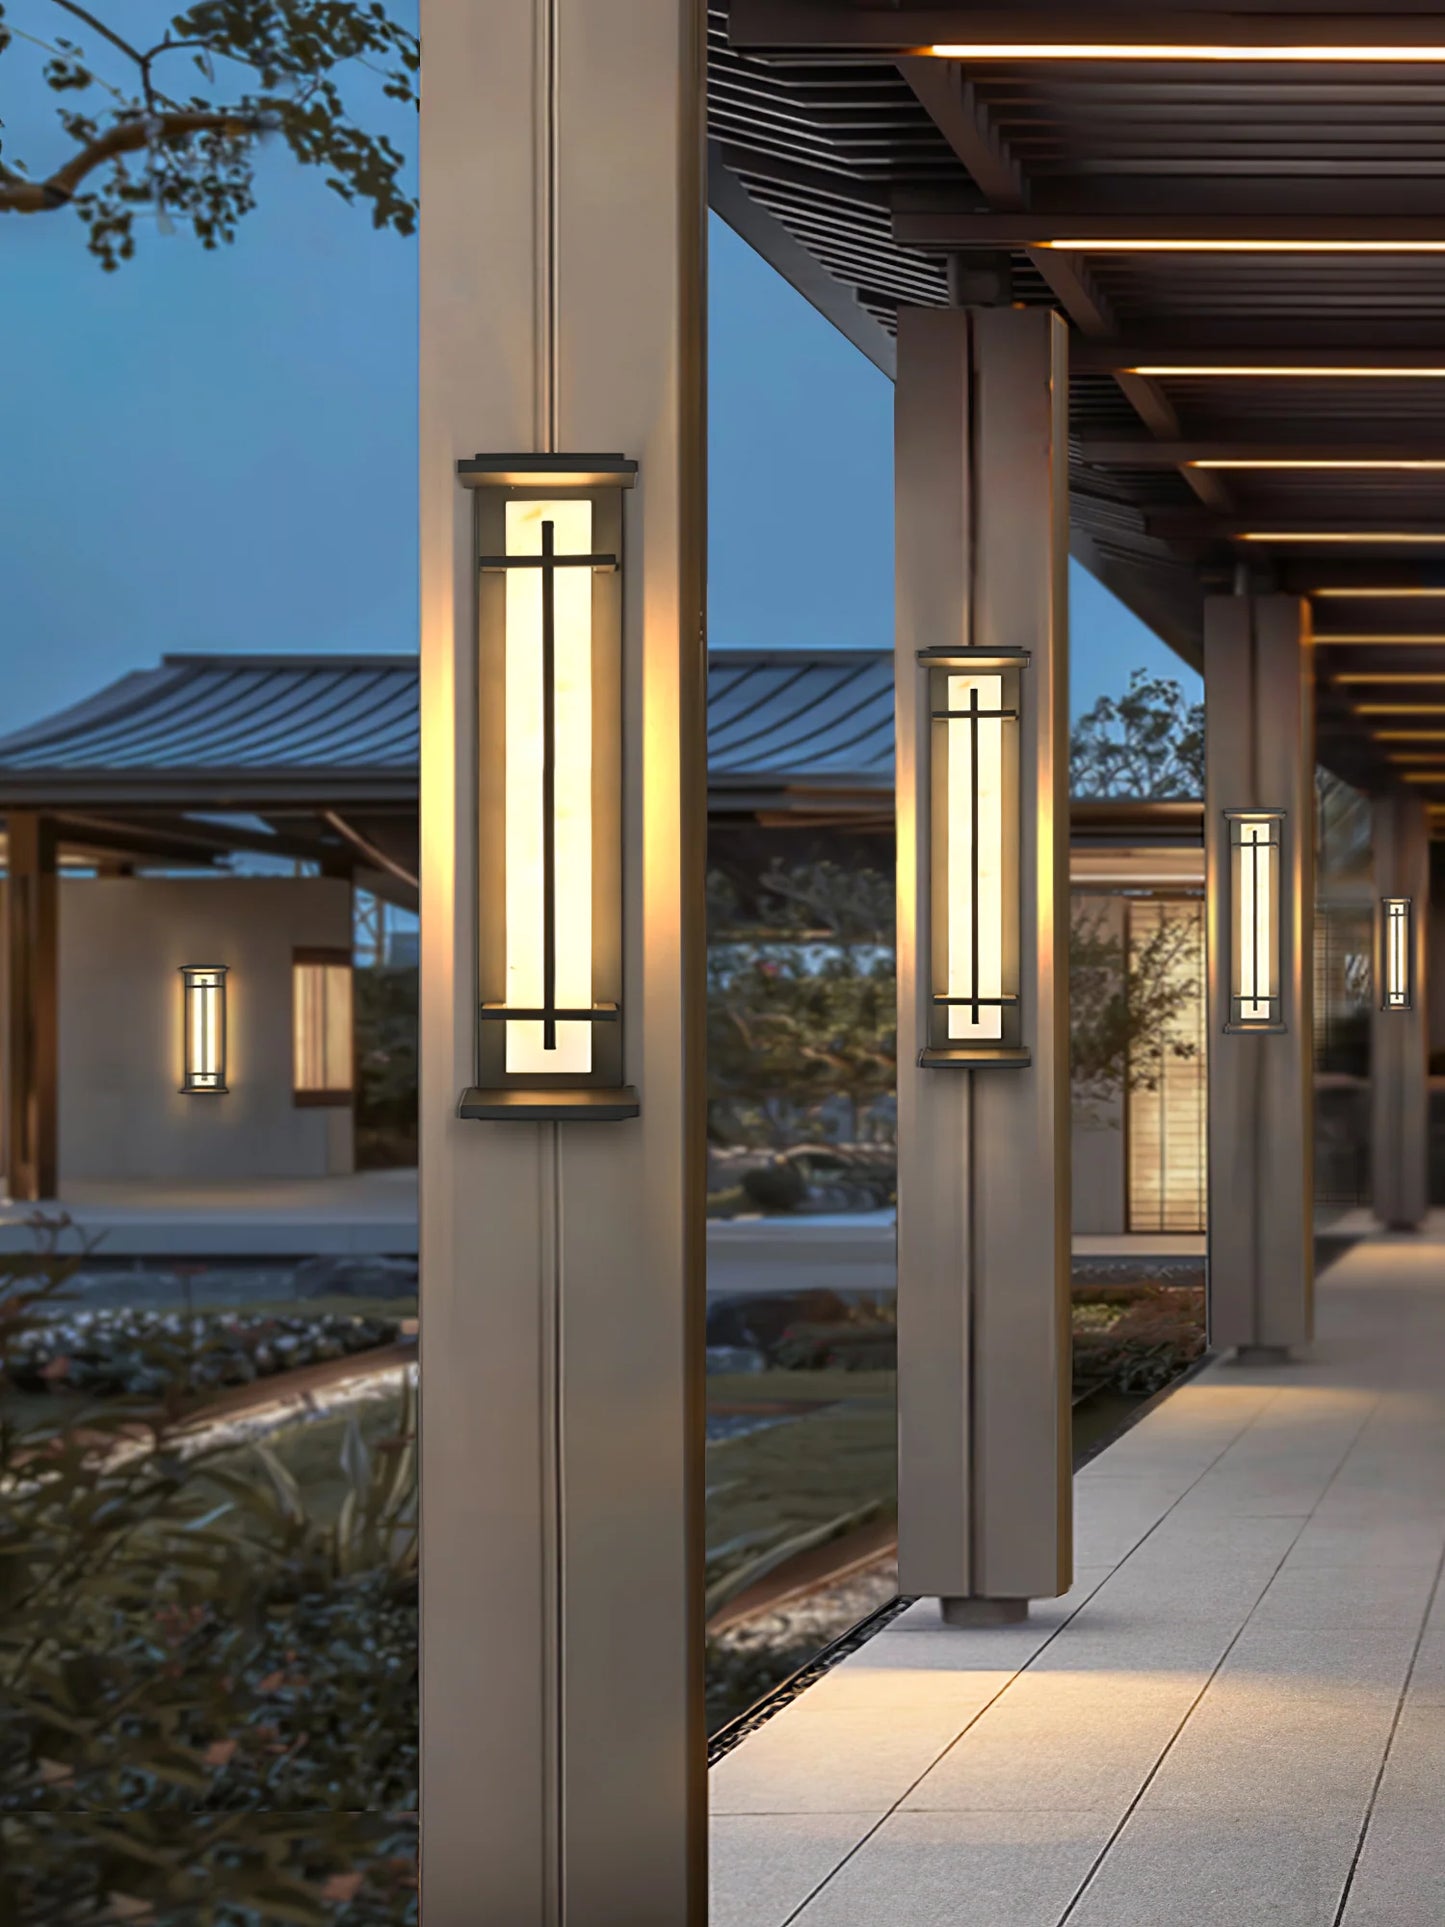 Square Strip Outdoor Wall Lamp